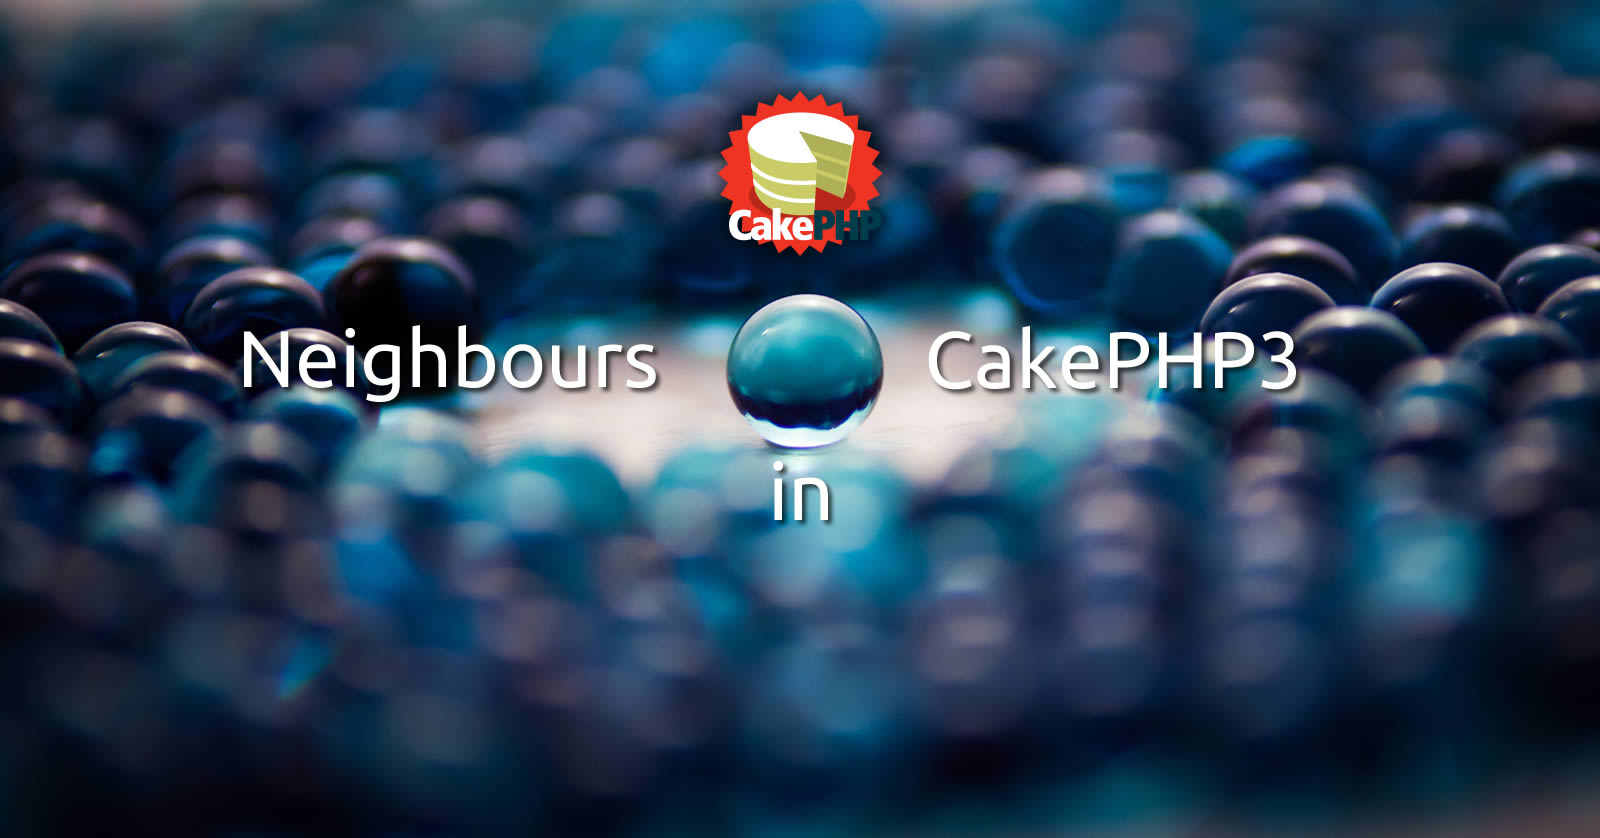 CakePHP3 equivalent of neighbor function in CakePHP2